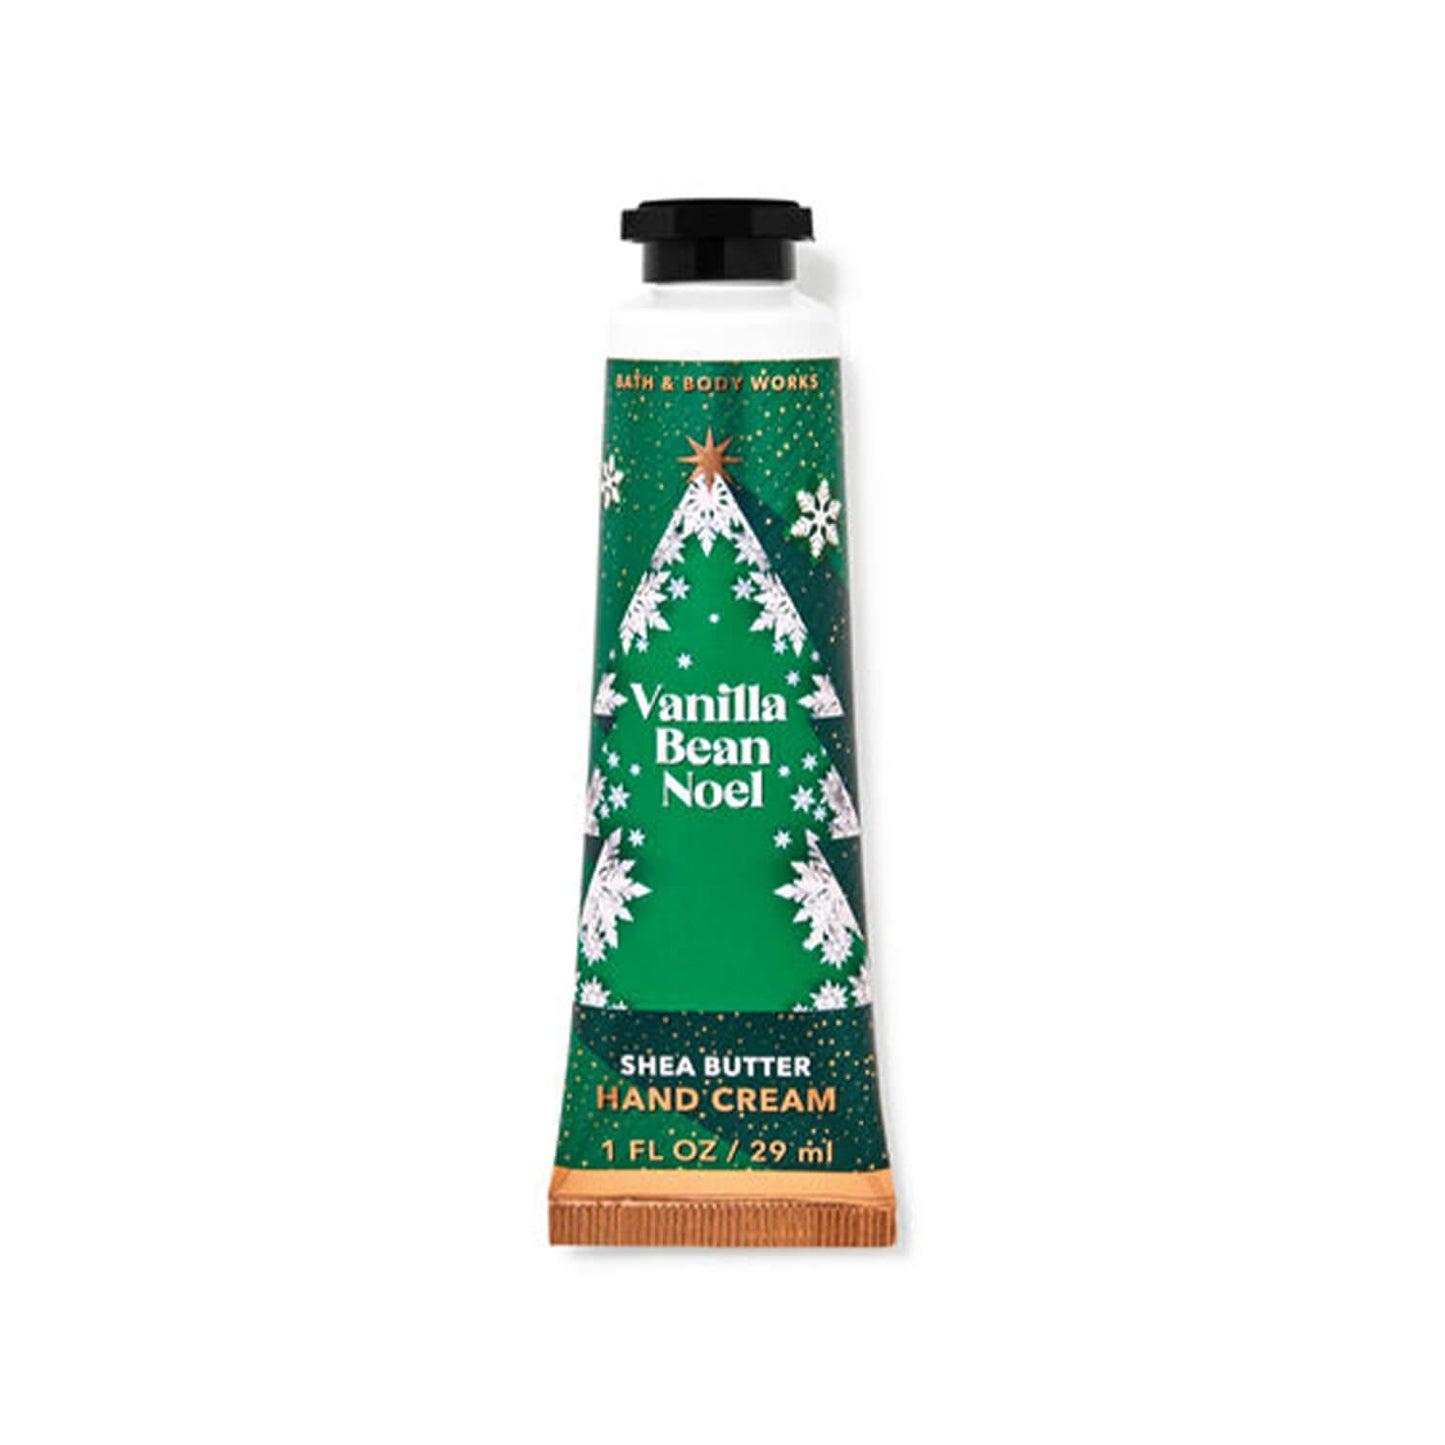 Bath and Body Works hand cream travel size vanilla bean noel available at Heygirl.pk for delivery in Karachi, Lahore, Islamabad across Pakistan